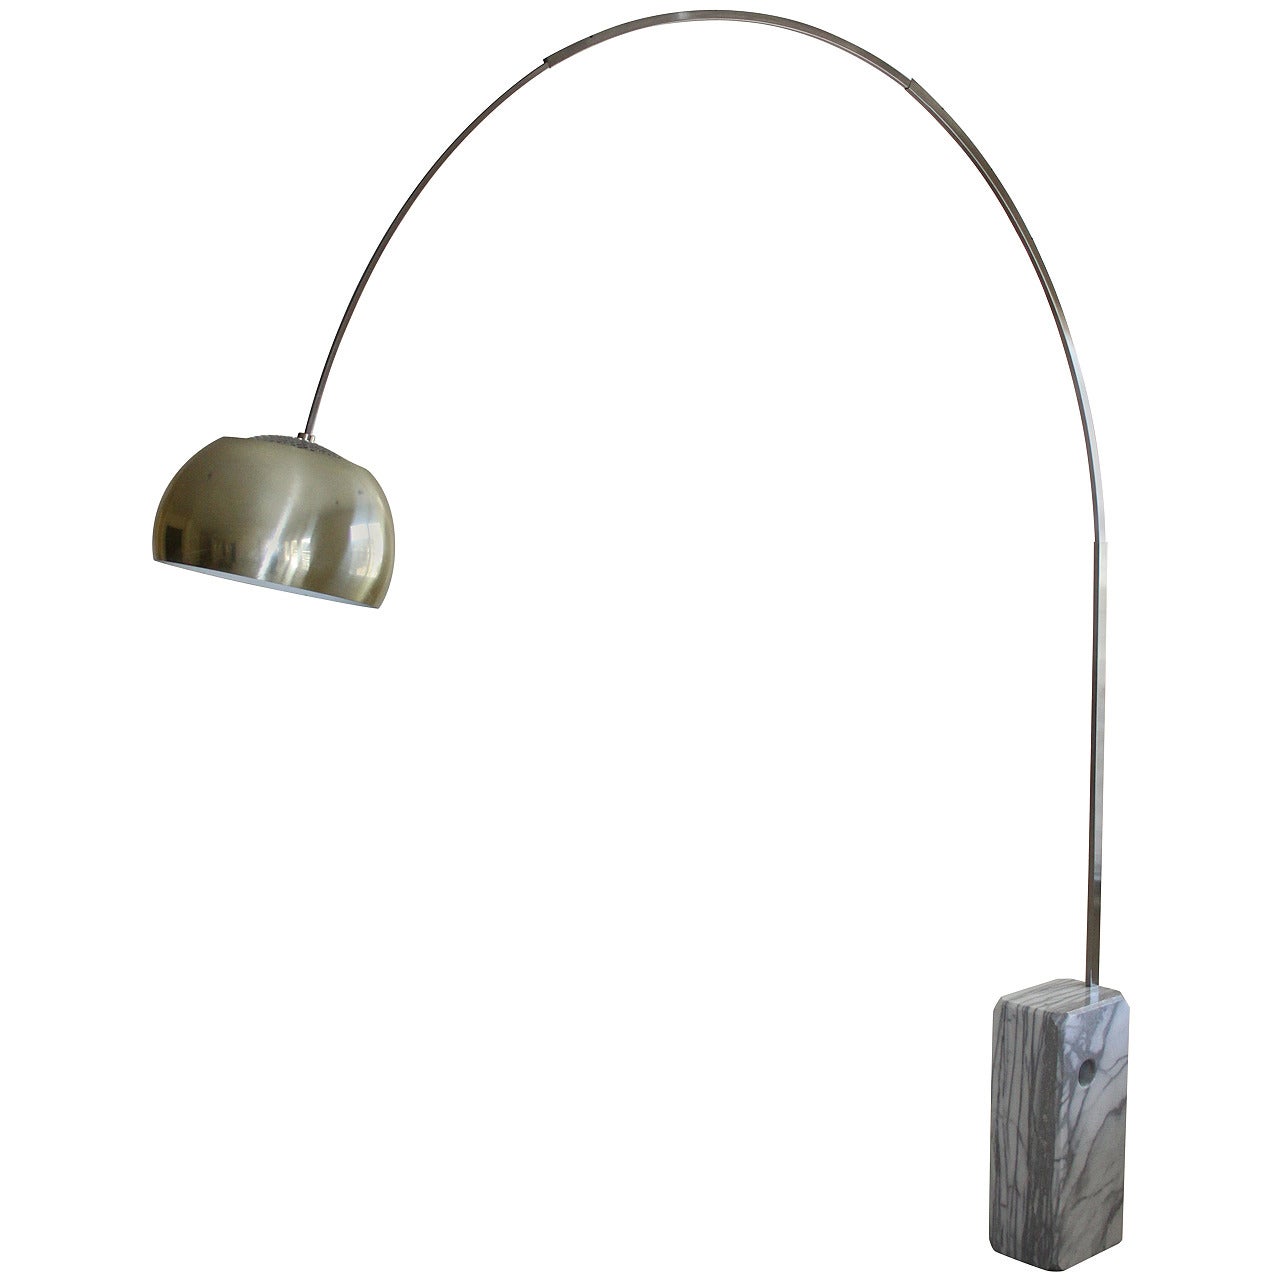 Vintage Arco Floor Lamp Designed by Achille Castiglioni in 1962 for Flos